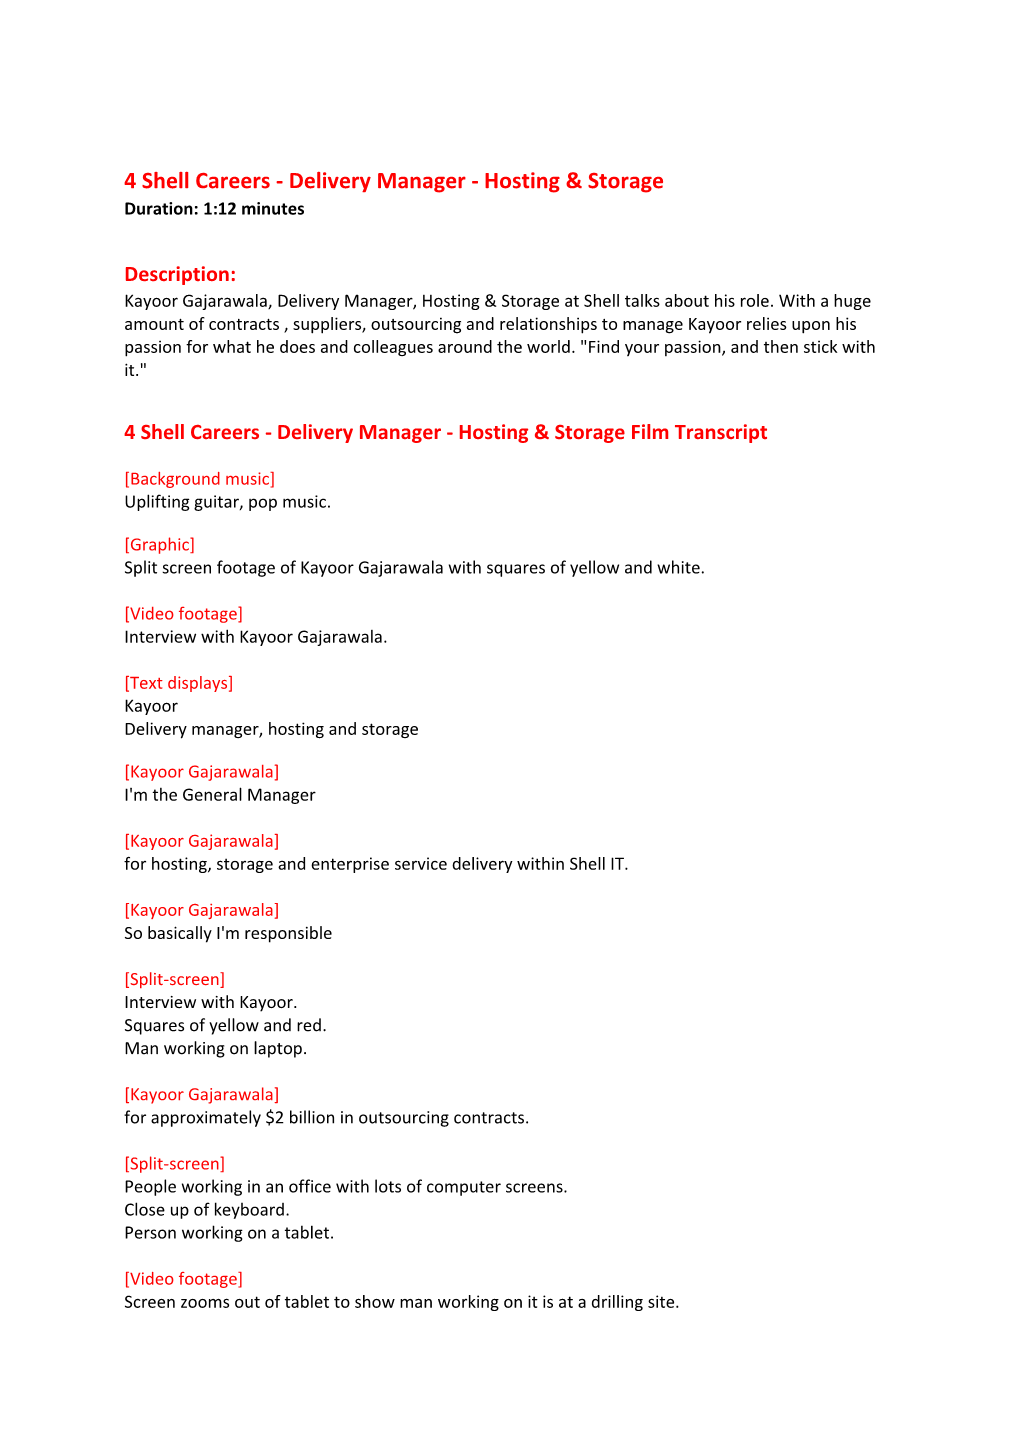 4 Shell Careers - Delivery Manager - Hosting & Storage